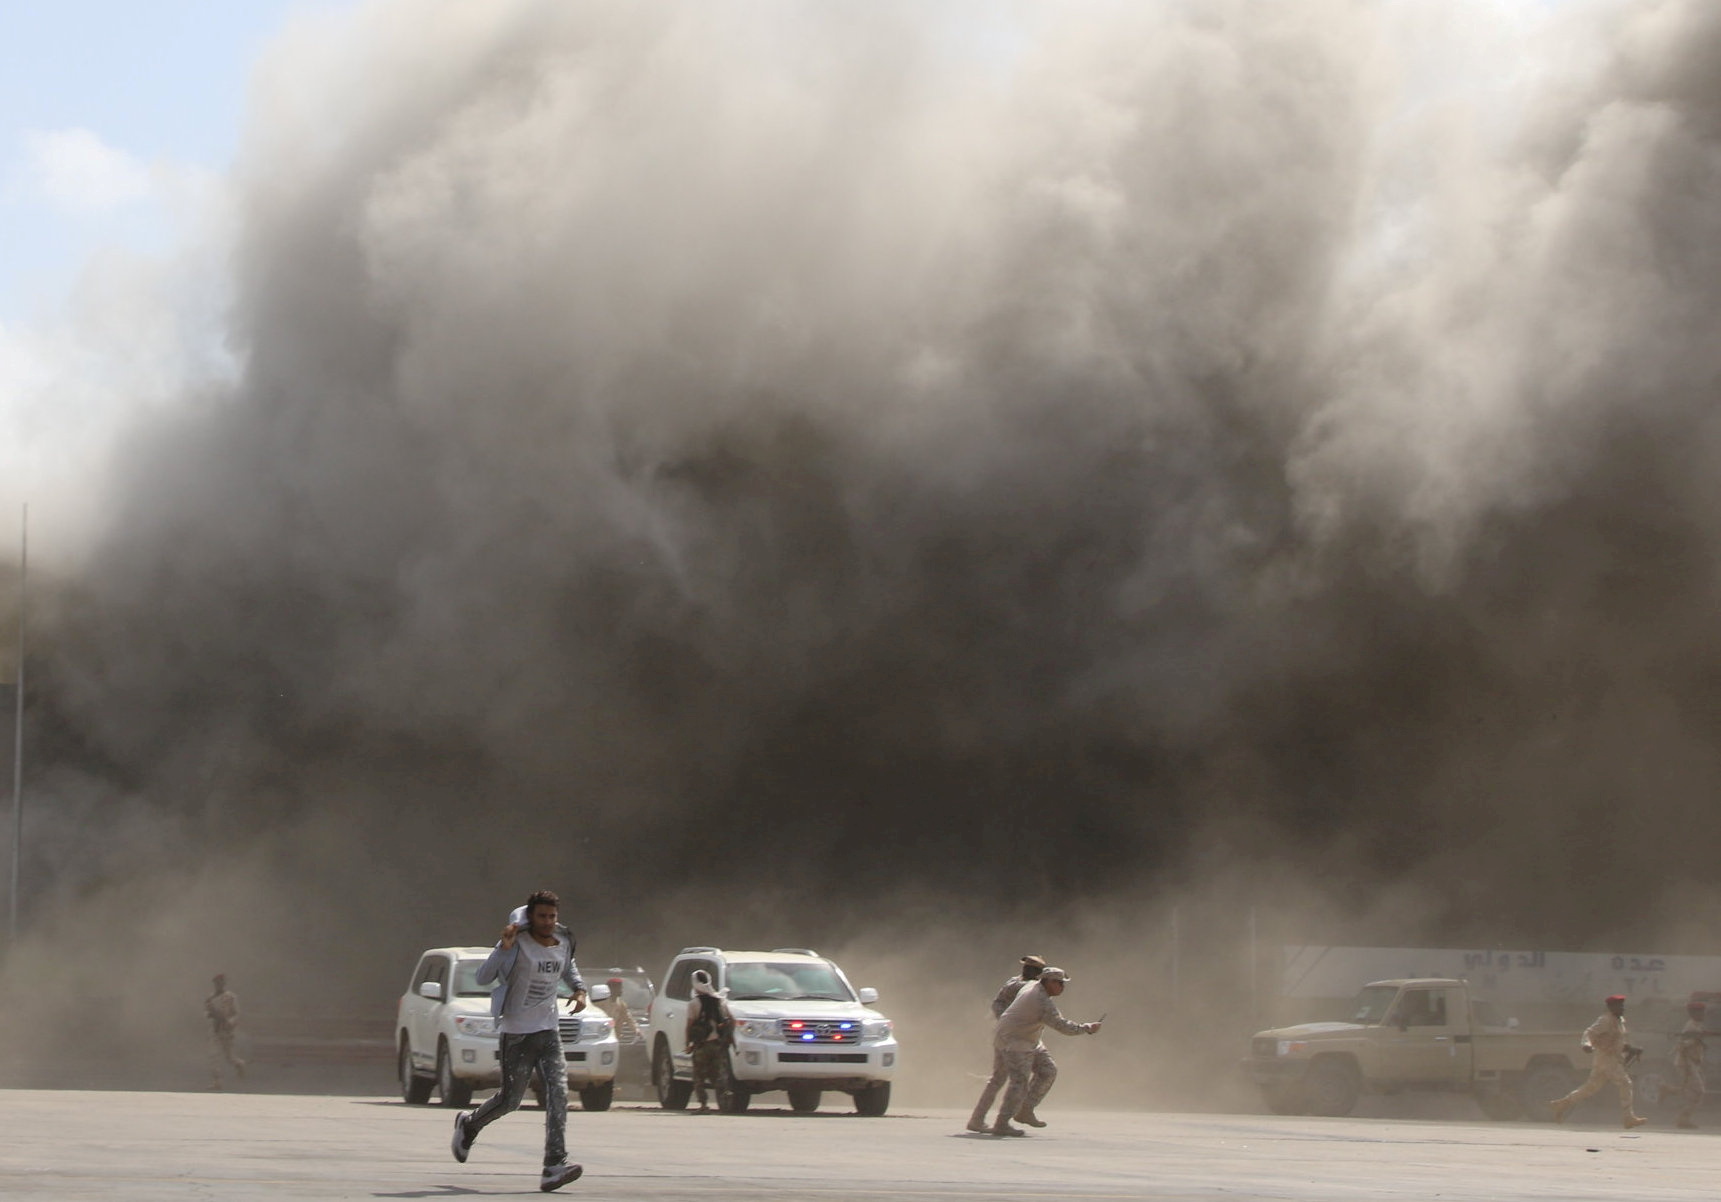 Blast at Yemen airport kills at least 16; 60 wounded